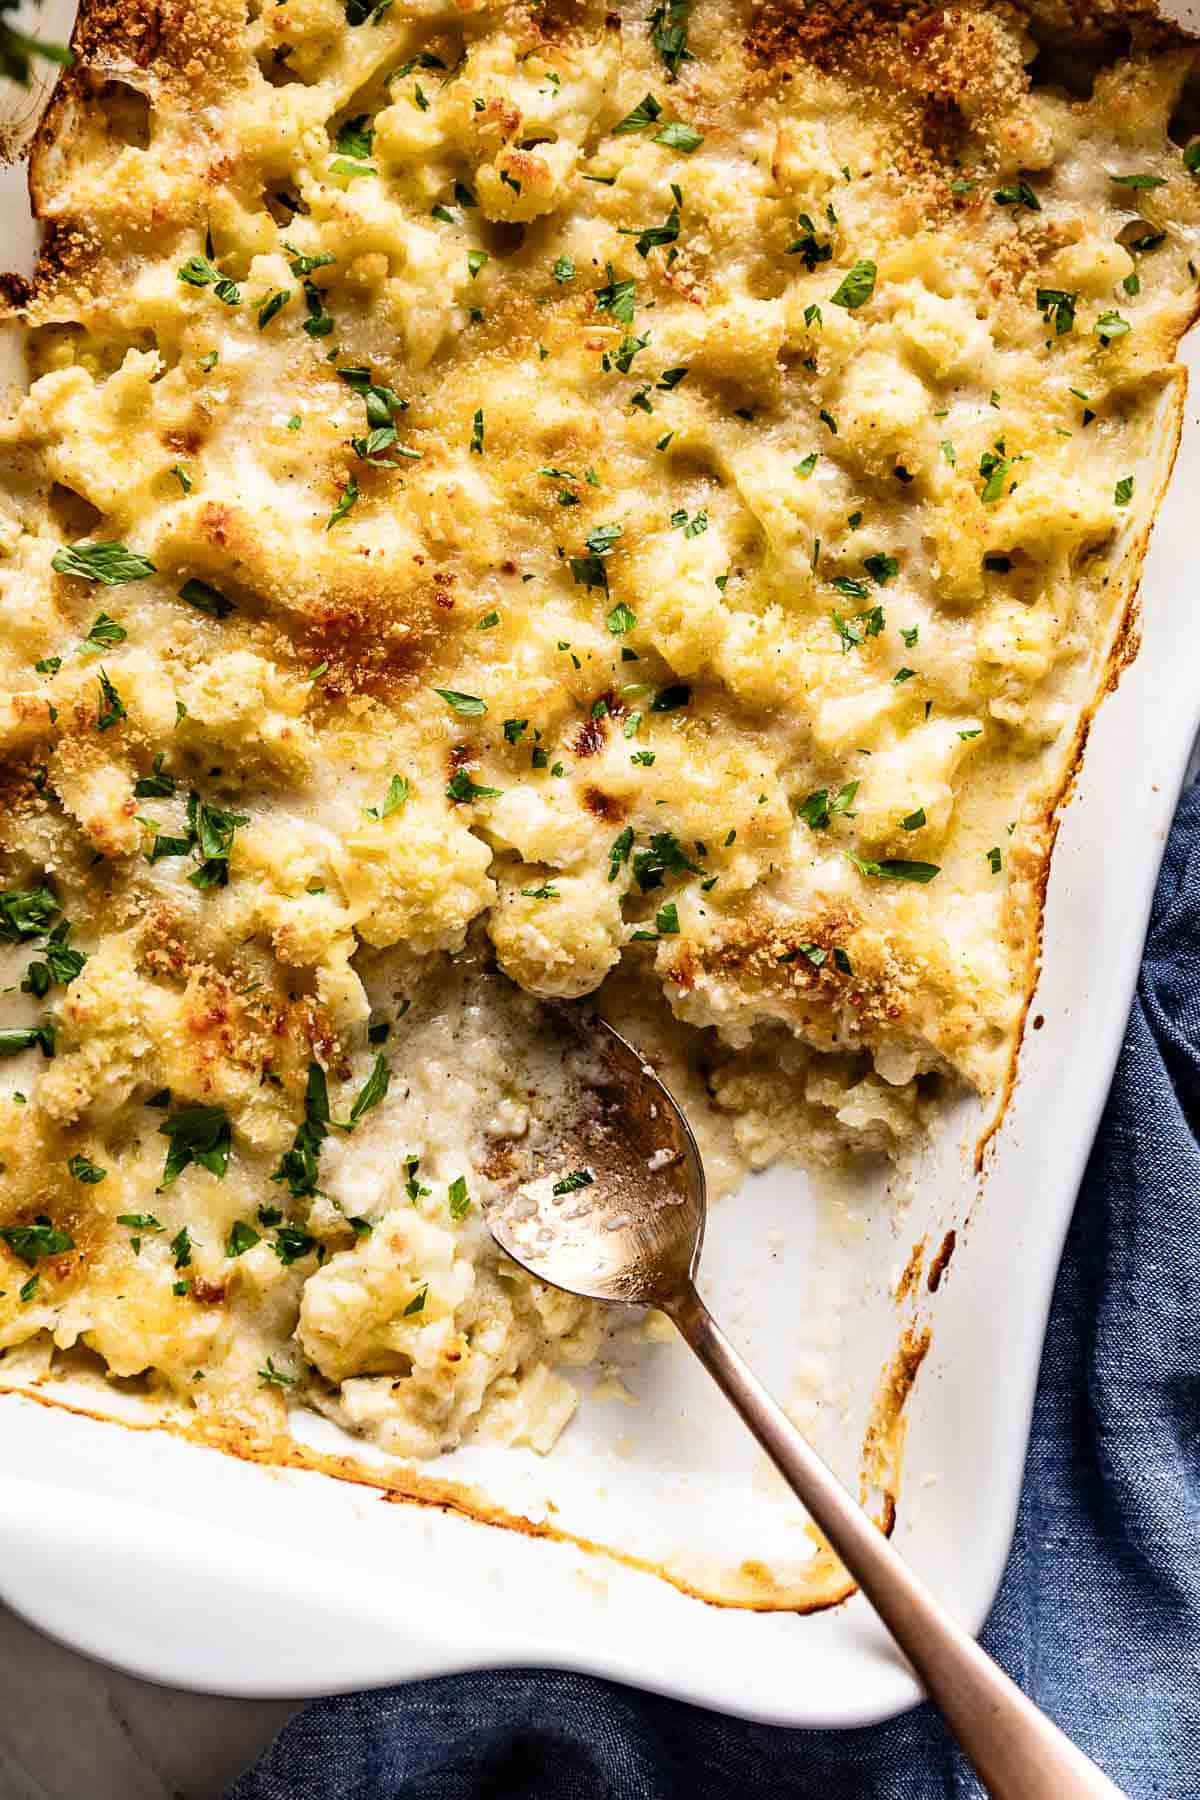 Cauliflower gratin in a casserole dish with a spoon on the side from the top view.